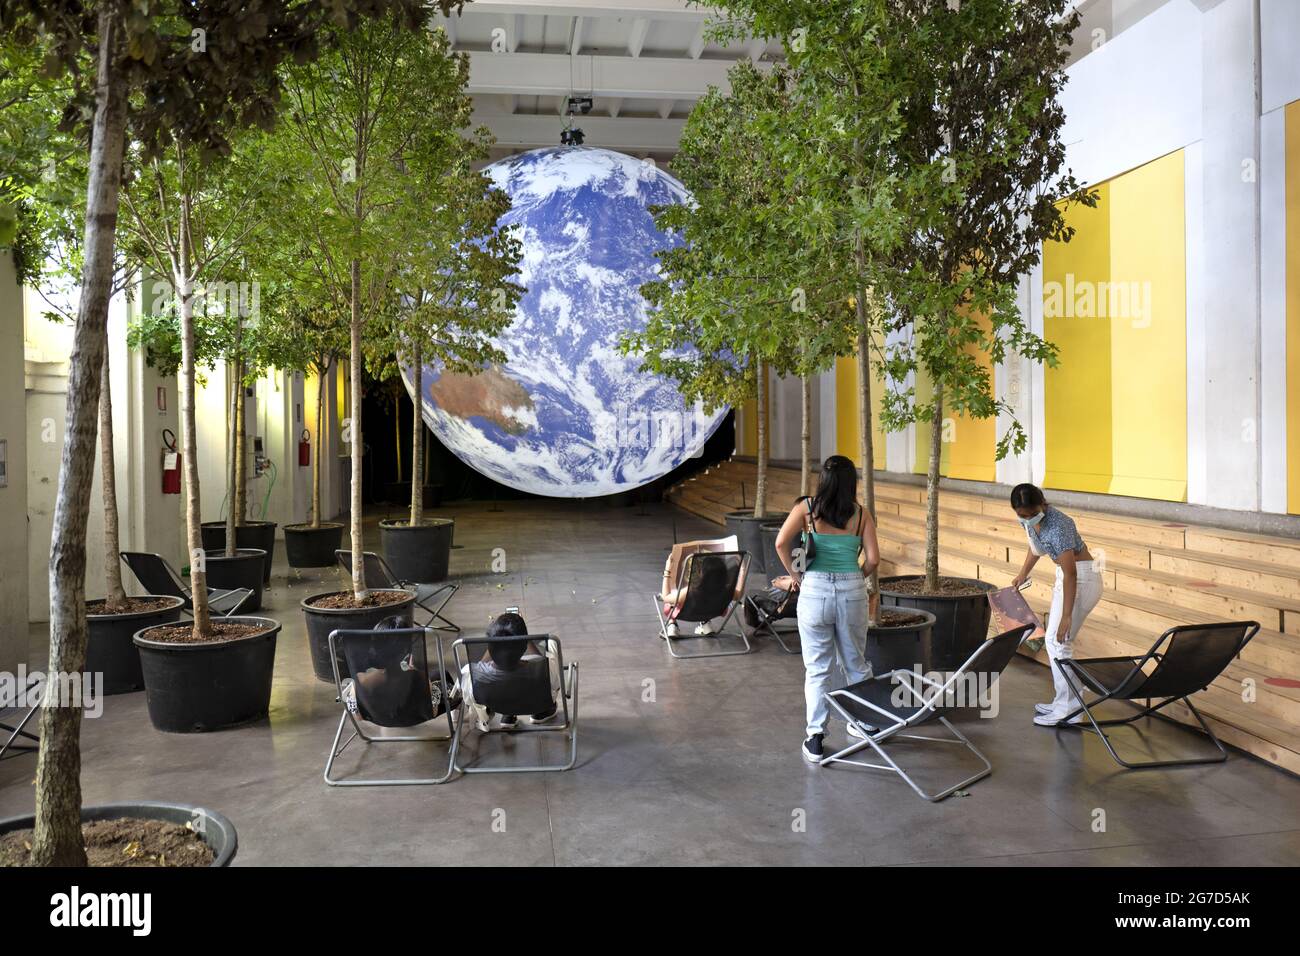 Gaia, an art installation of the british artist Luke Jerram about our planet earth, at Base, Milan, Italy. Stock Photo